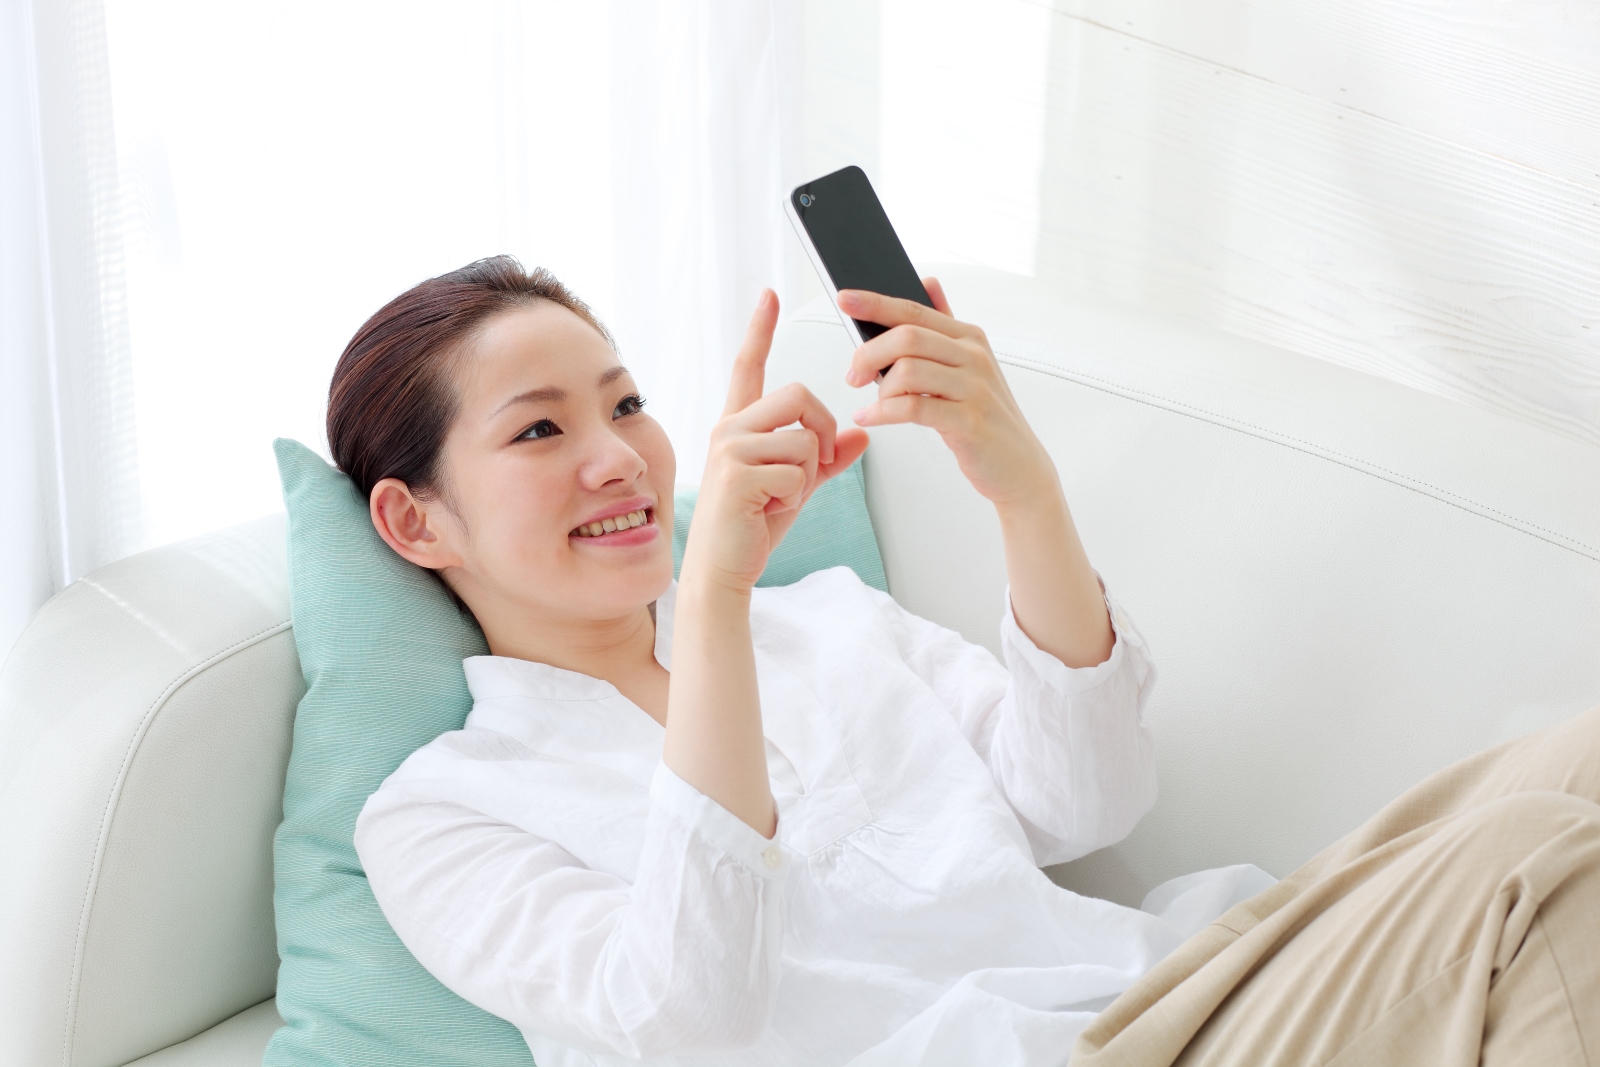 Mobile Shopping in APAC is Expected to Hit $1 Trillion by 2020